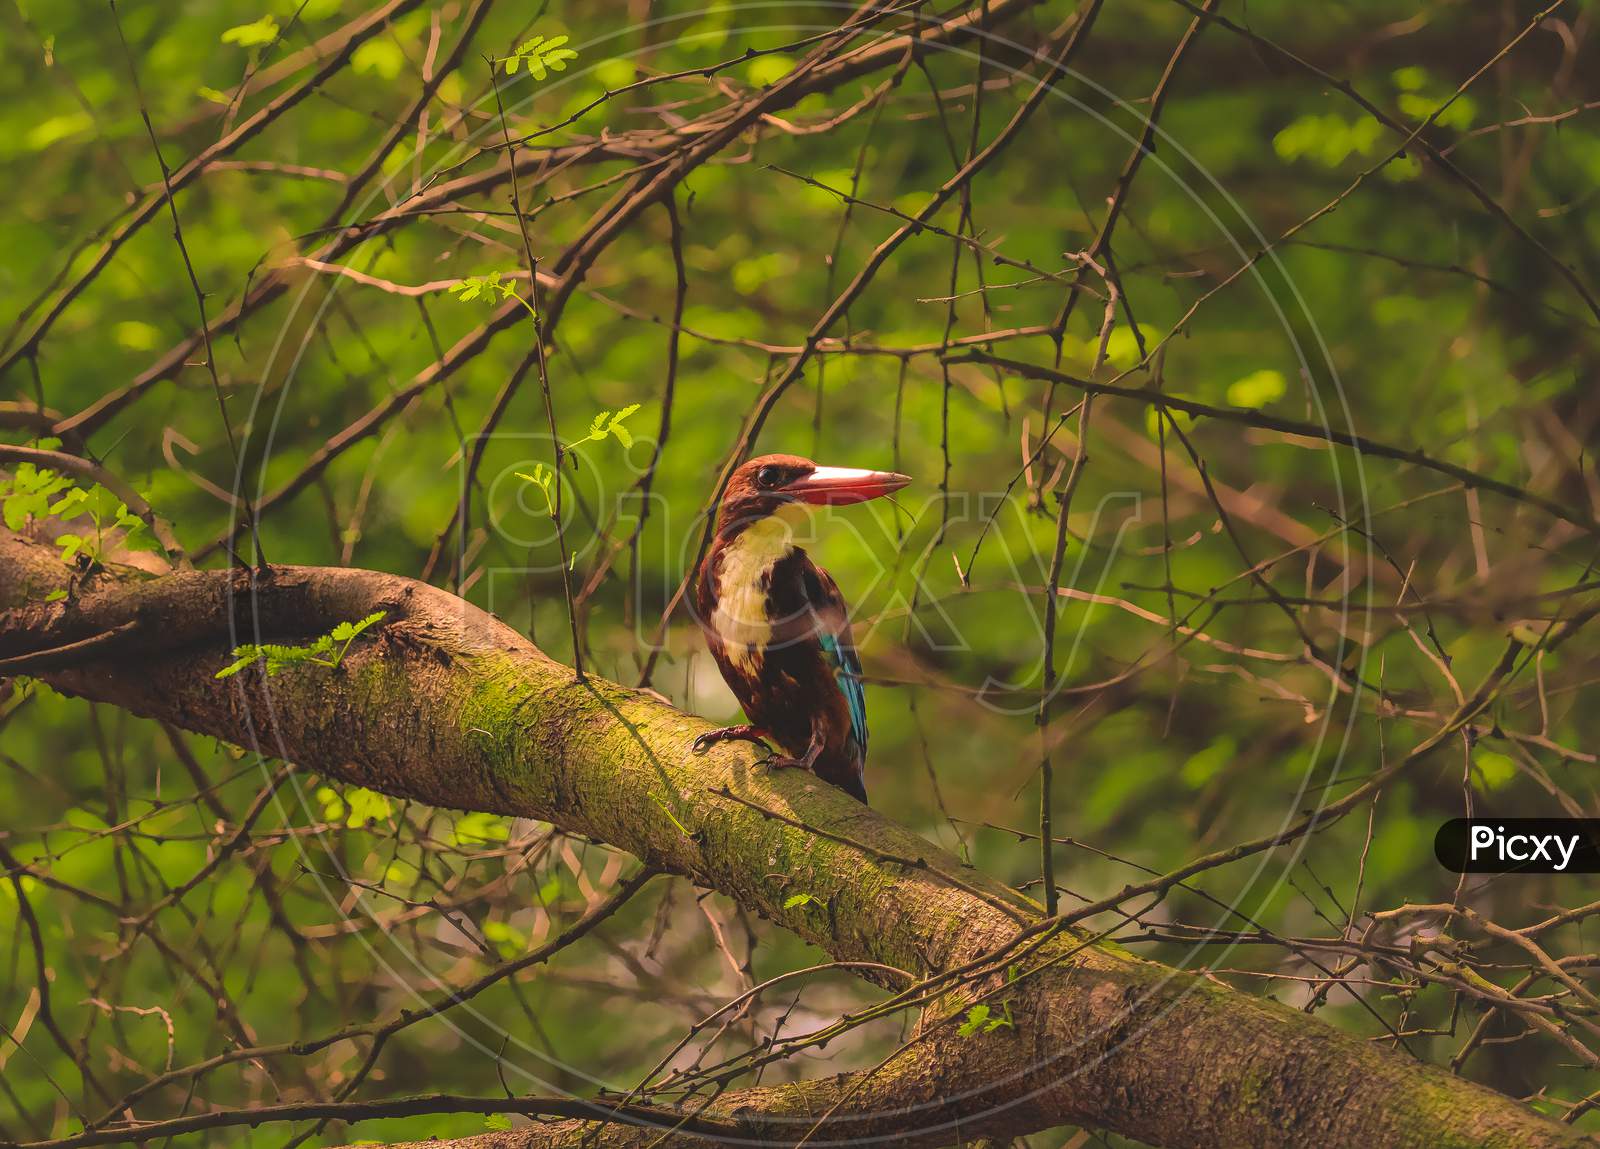 The White-Throated Kingfisher